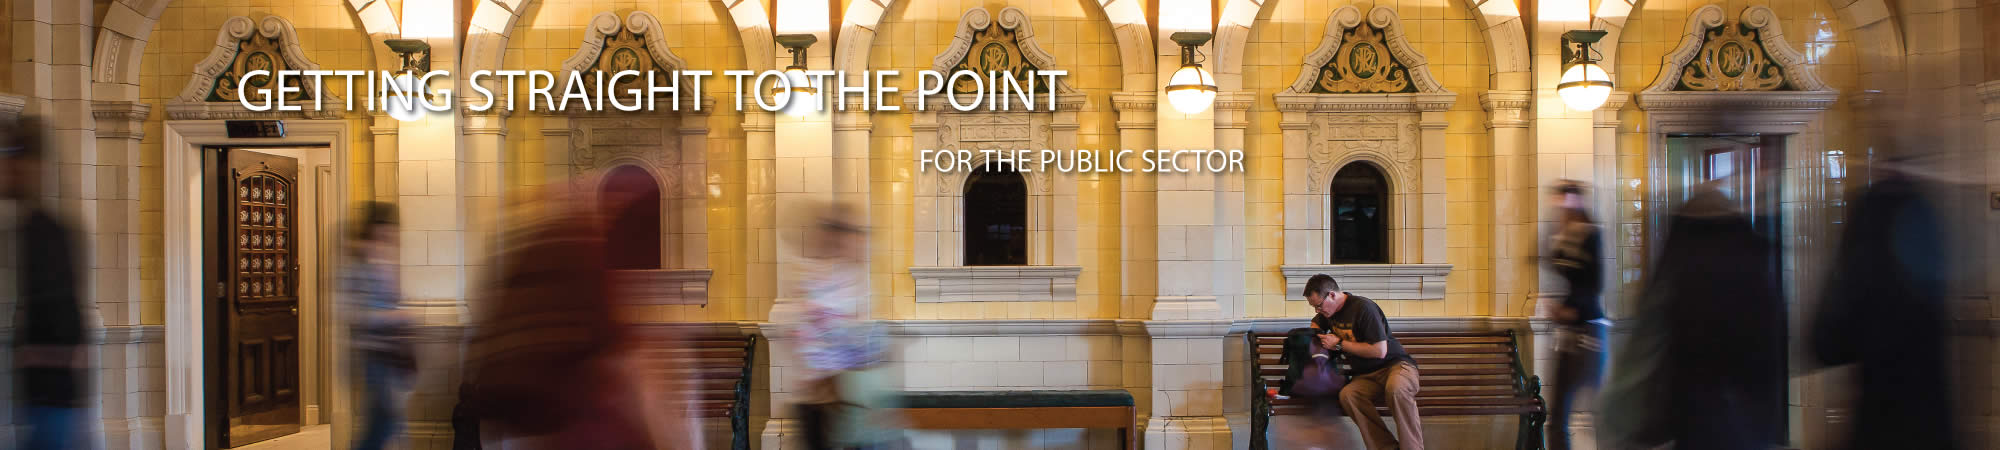 Getting straight to the point for the public sector